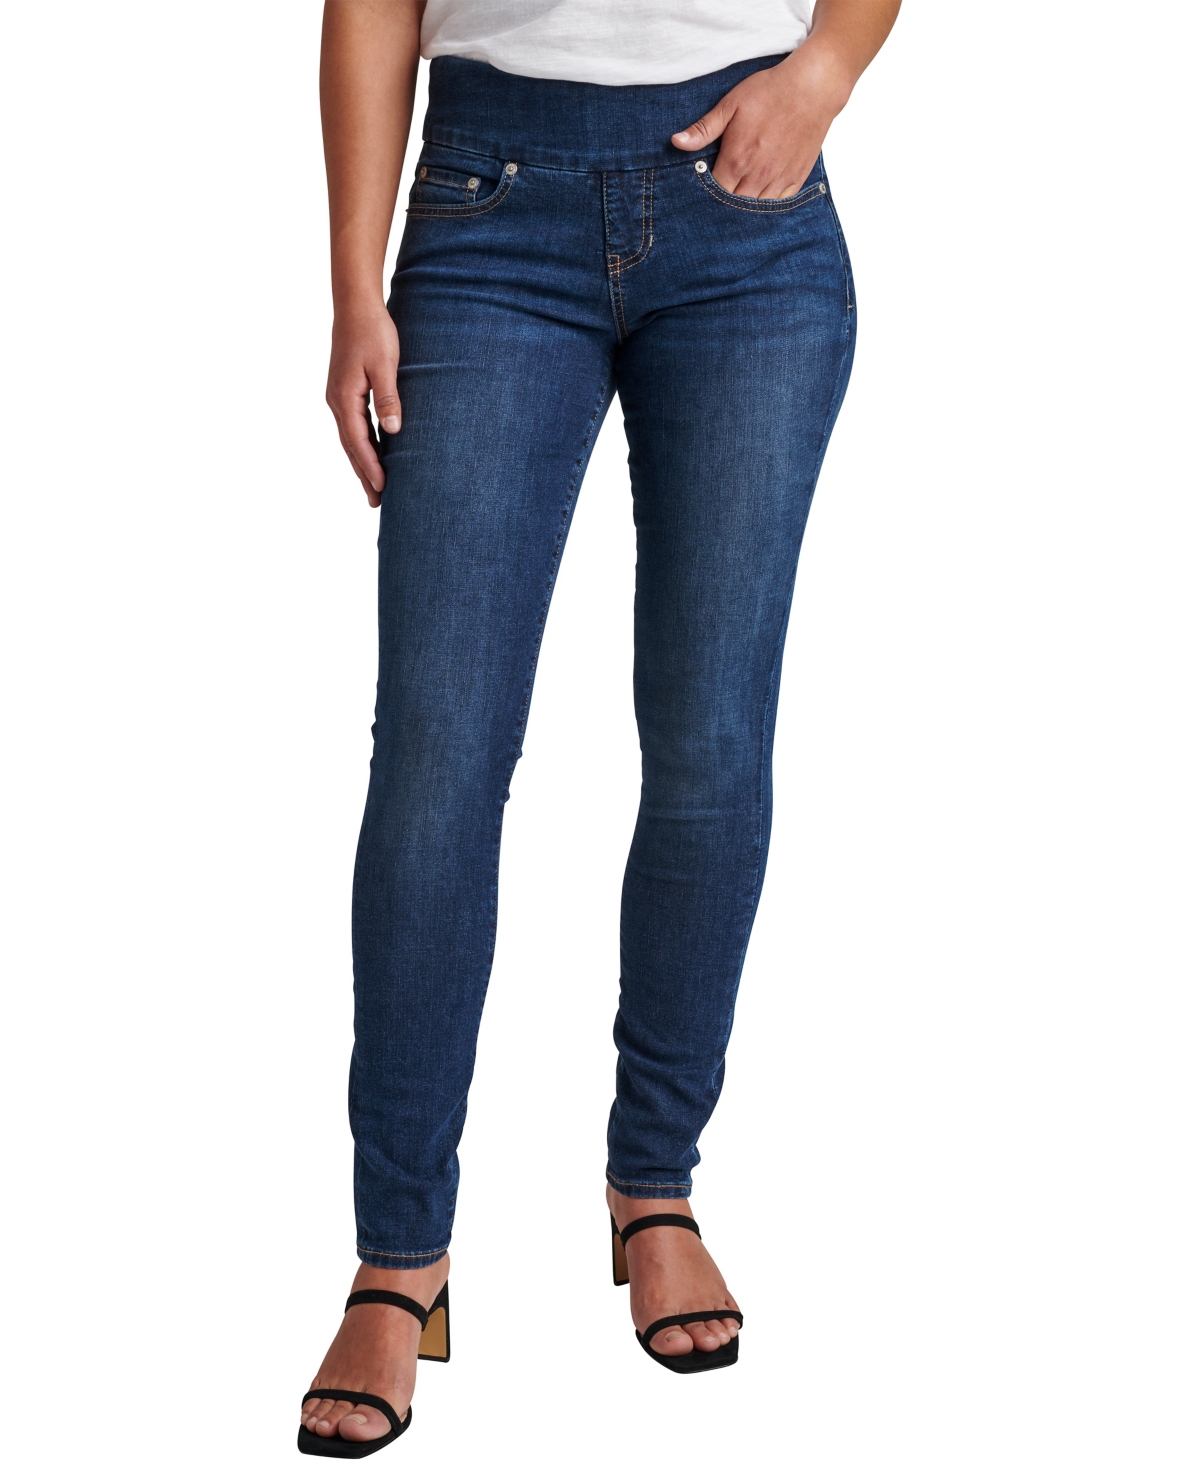 Jag Jeans Women's Nora Mid Rise Skinny Pull-On Jeans